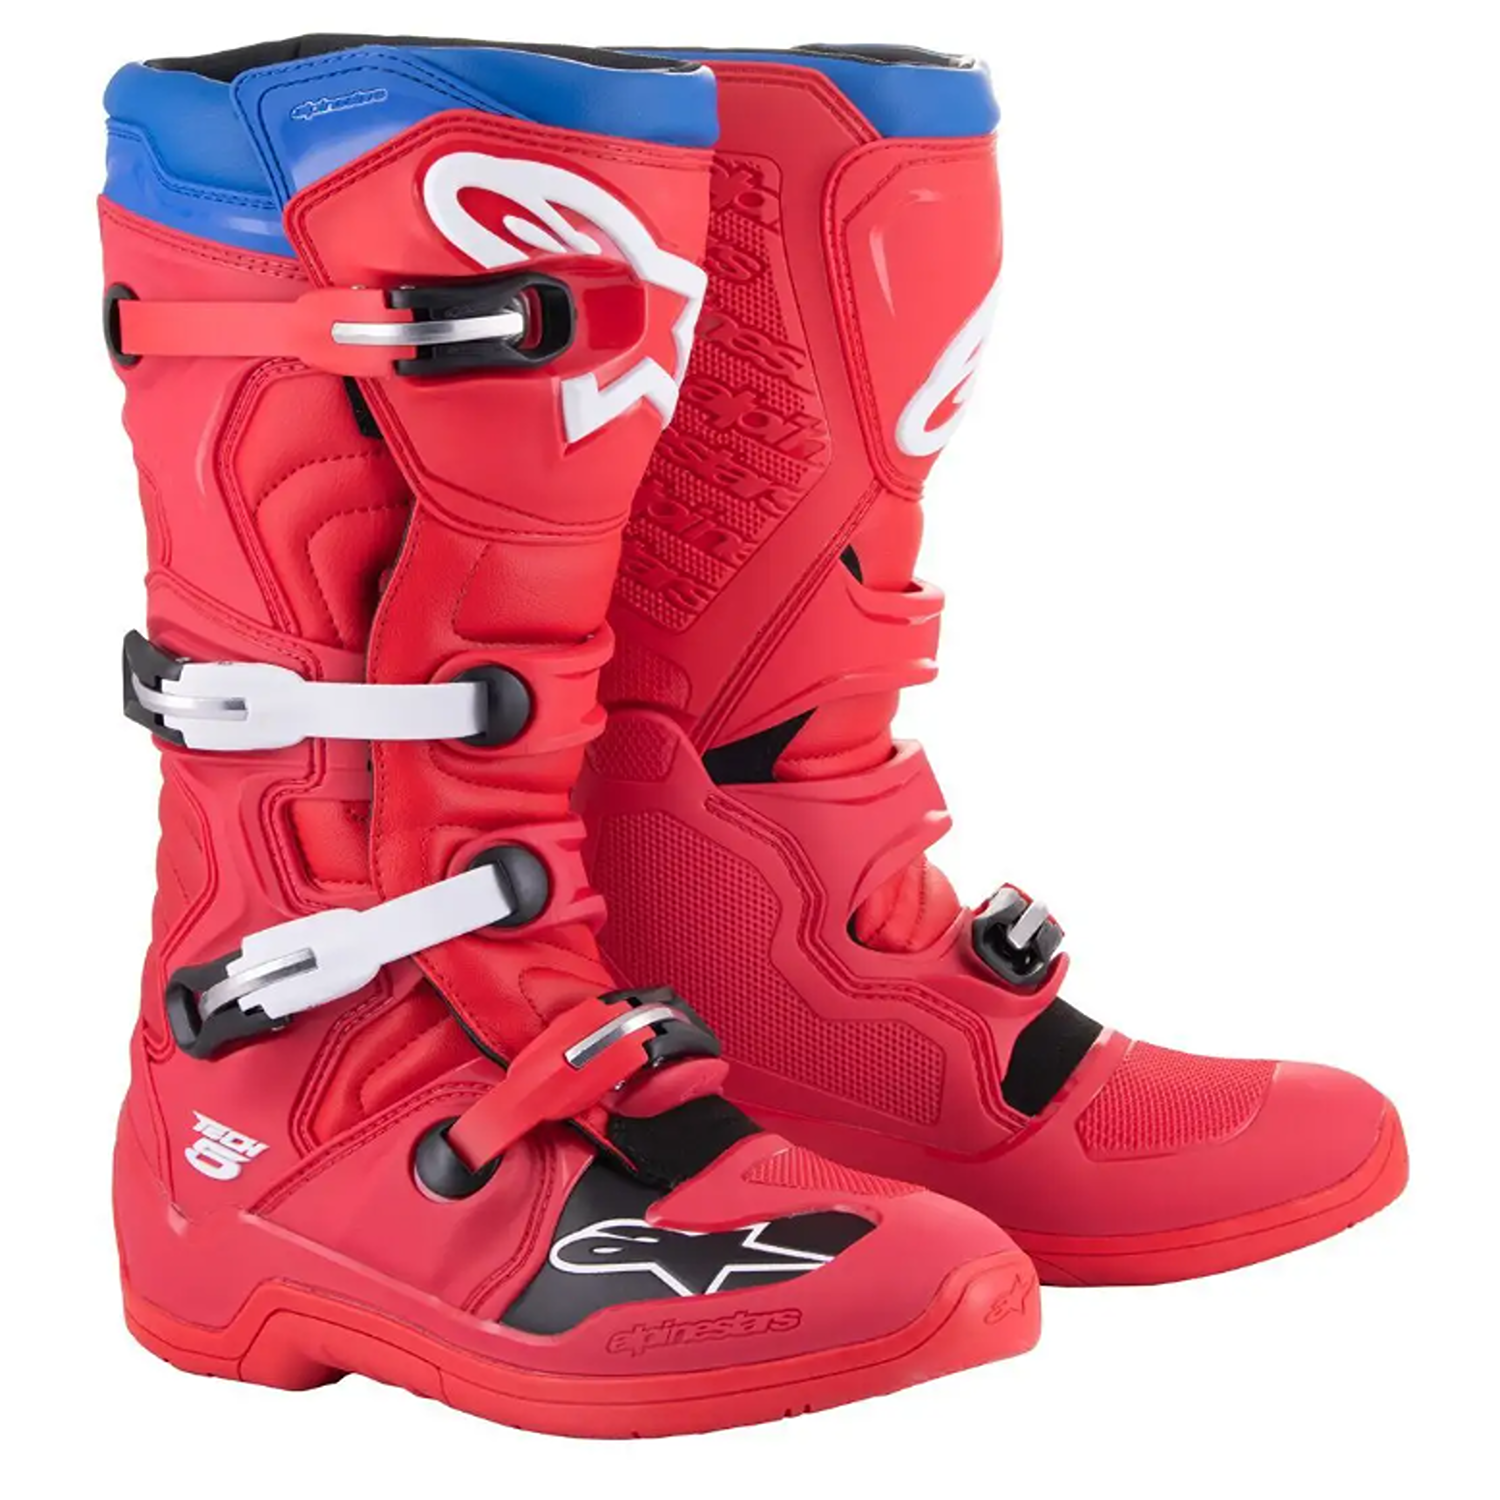 Image of Alpinestars Tech 5 Boots Bright Red Dark Red Blue Size US 8 ID 8059347199337